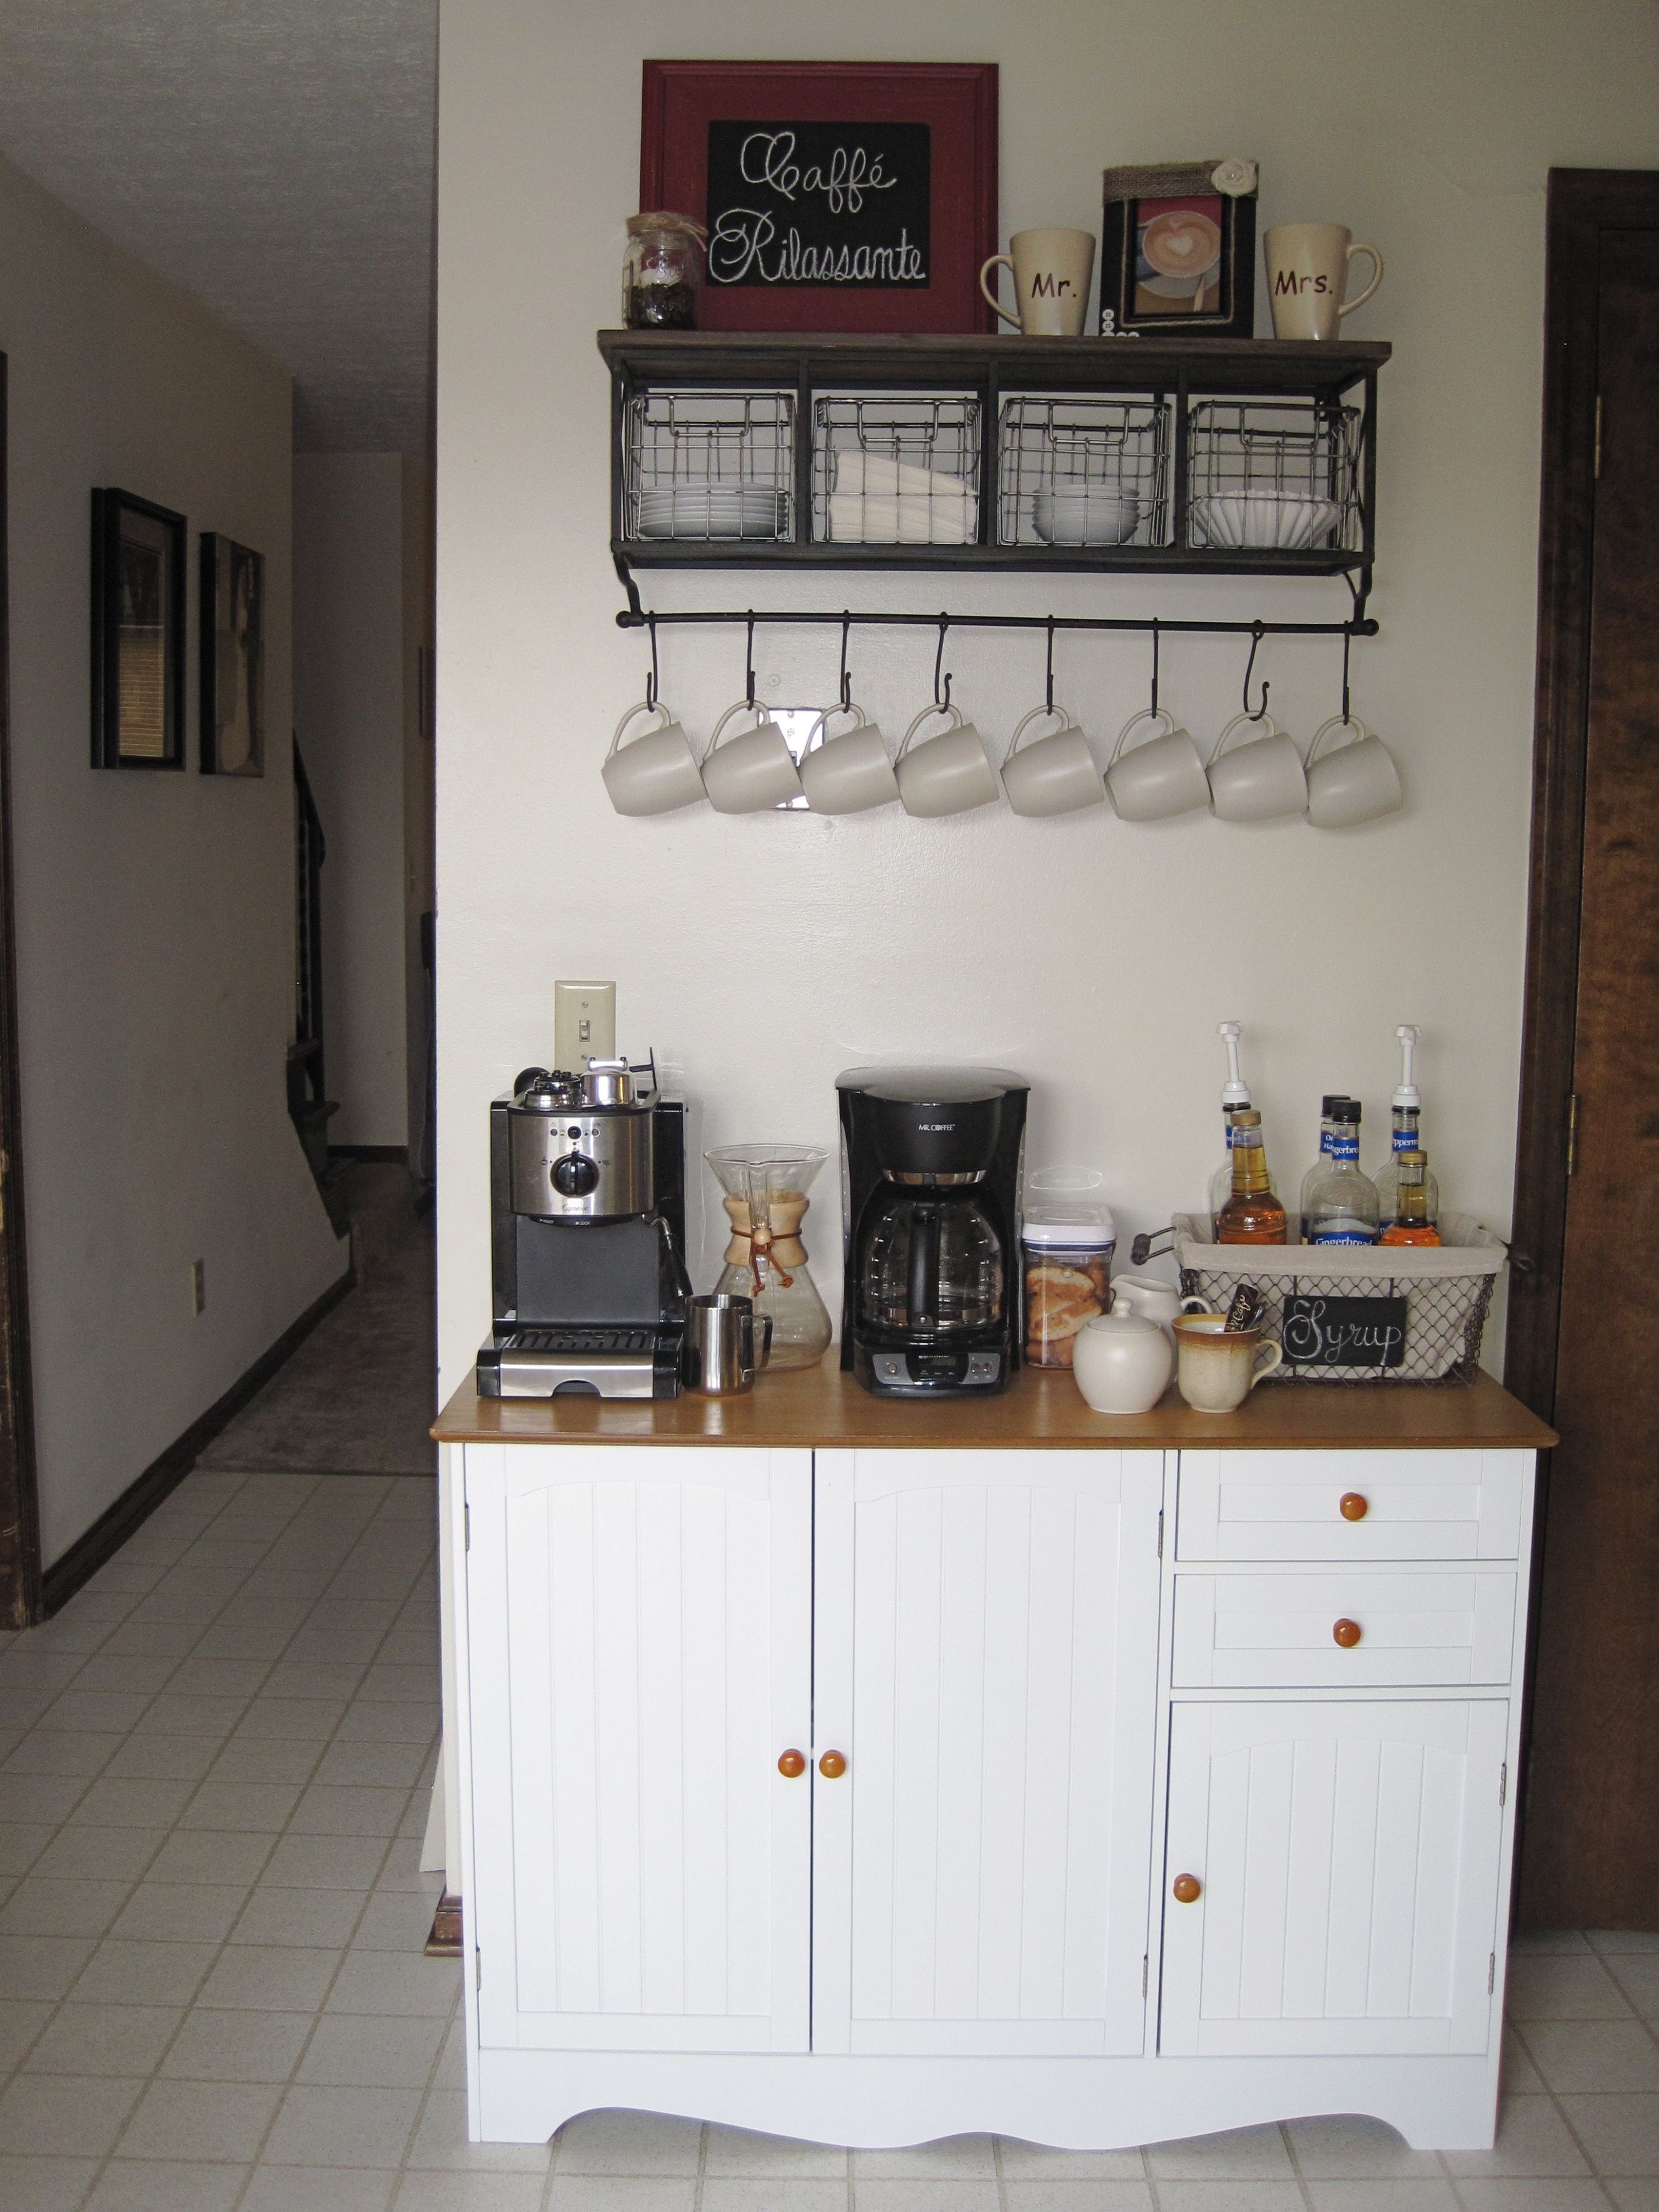 Our Coffee Bar In Our Kitchen! Coffee Bar Table Amazon Hanging ..